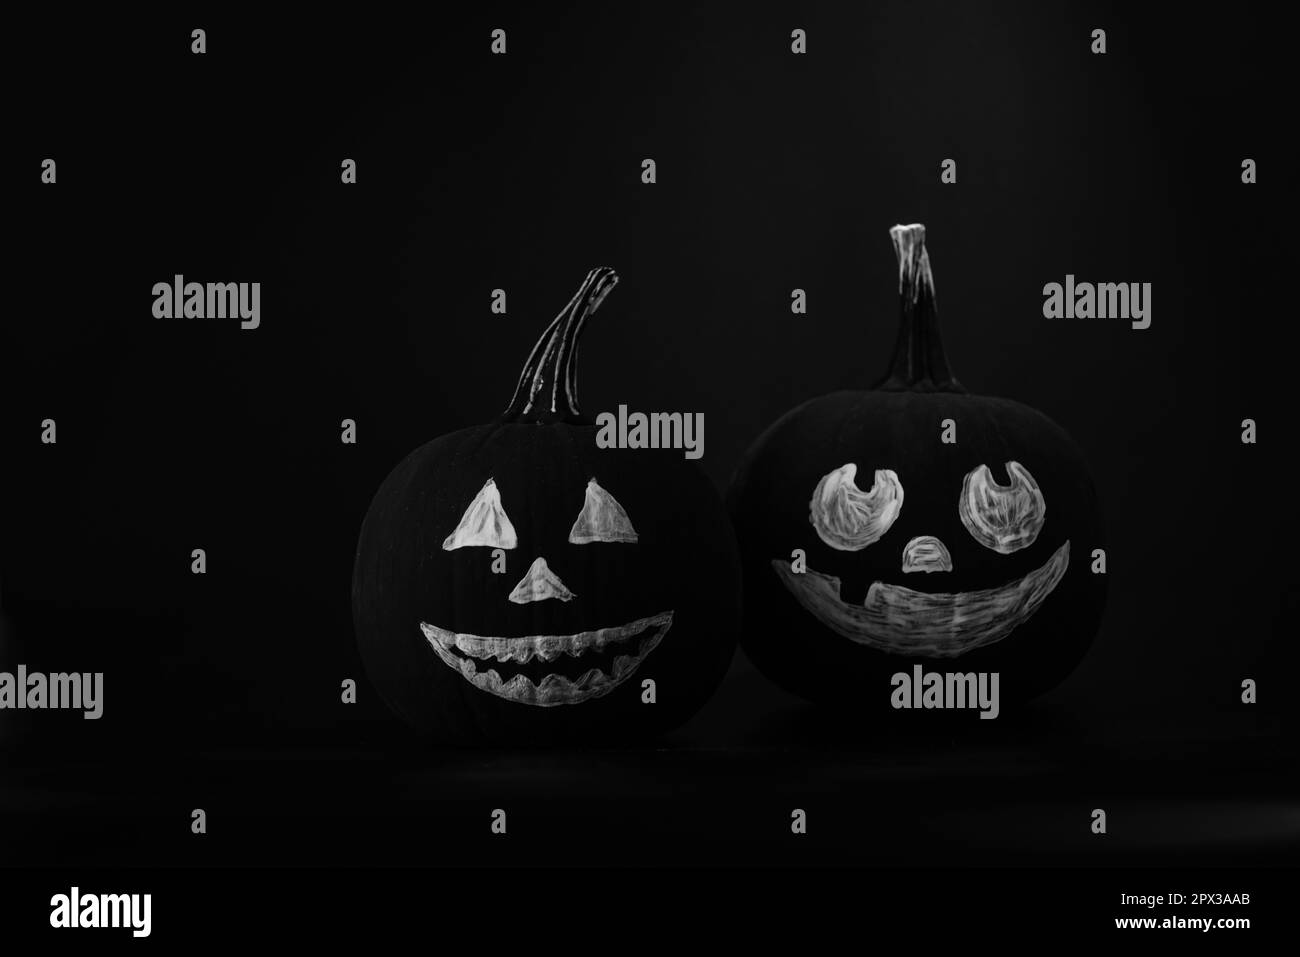 Halloween celebration. Pumpkins with drawn faces on table in darkness Stock Photo